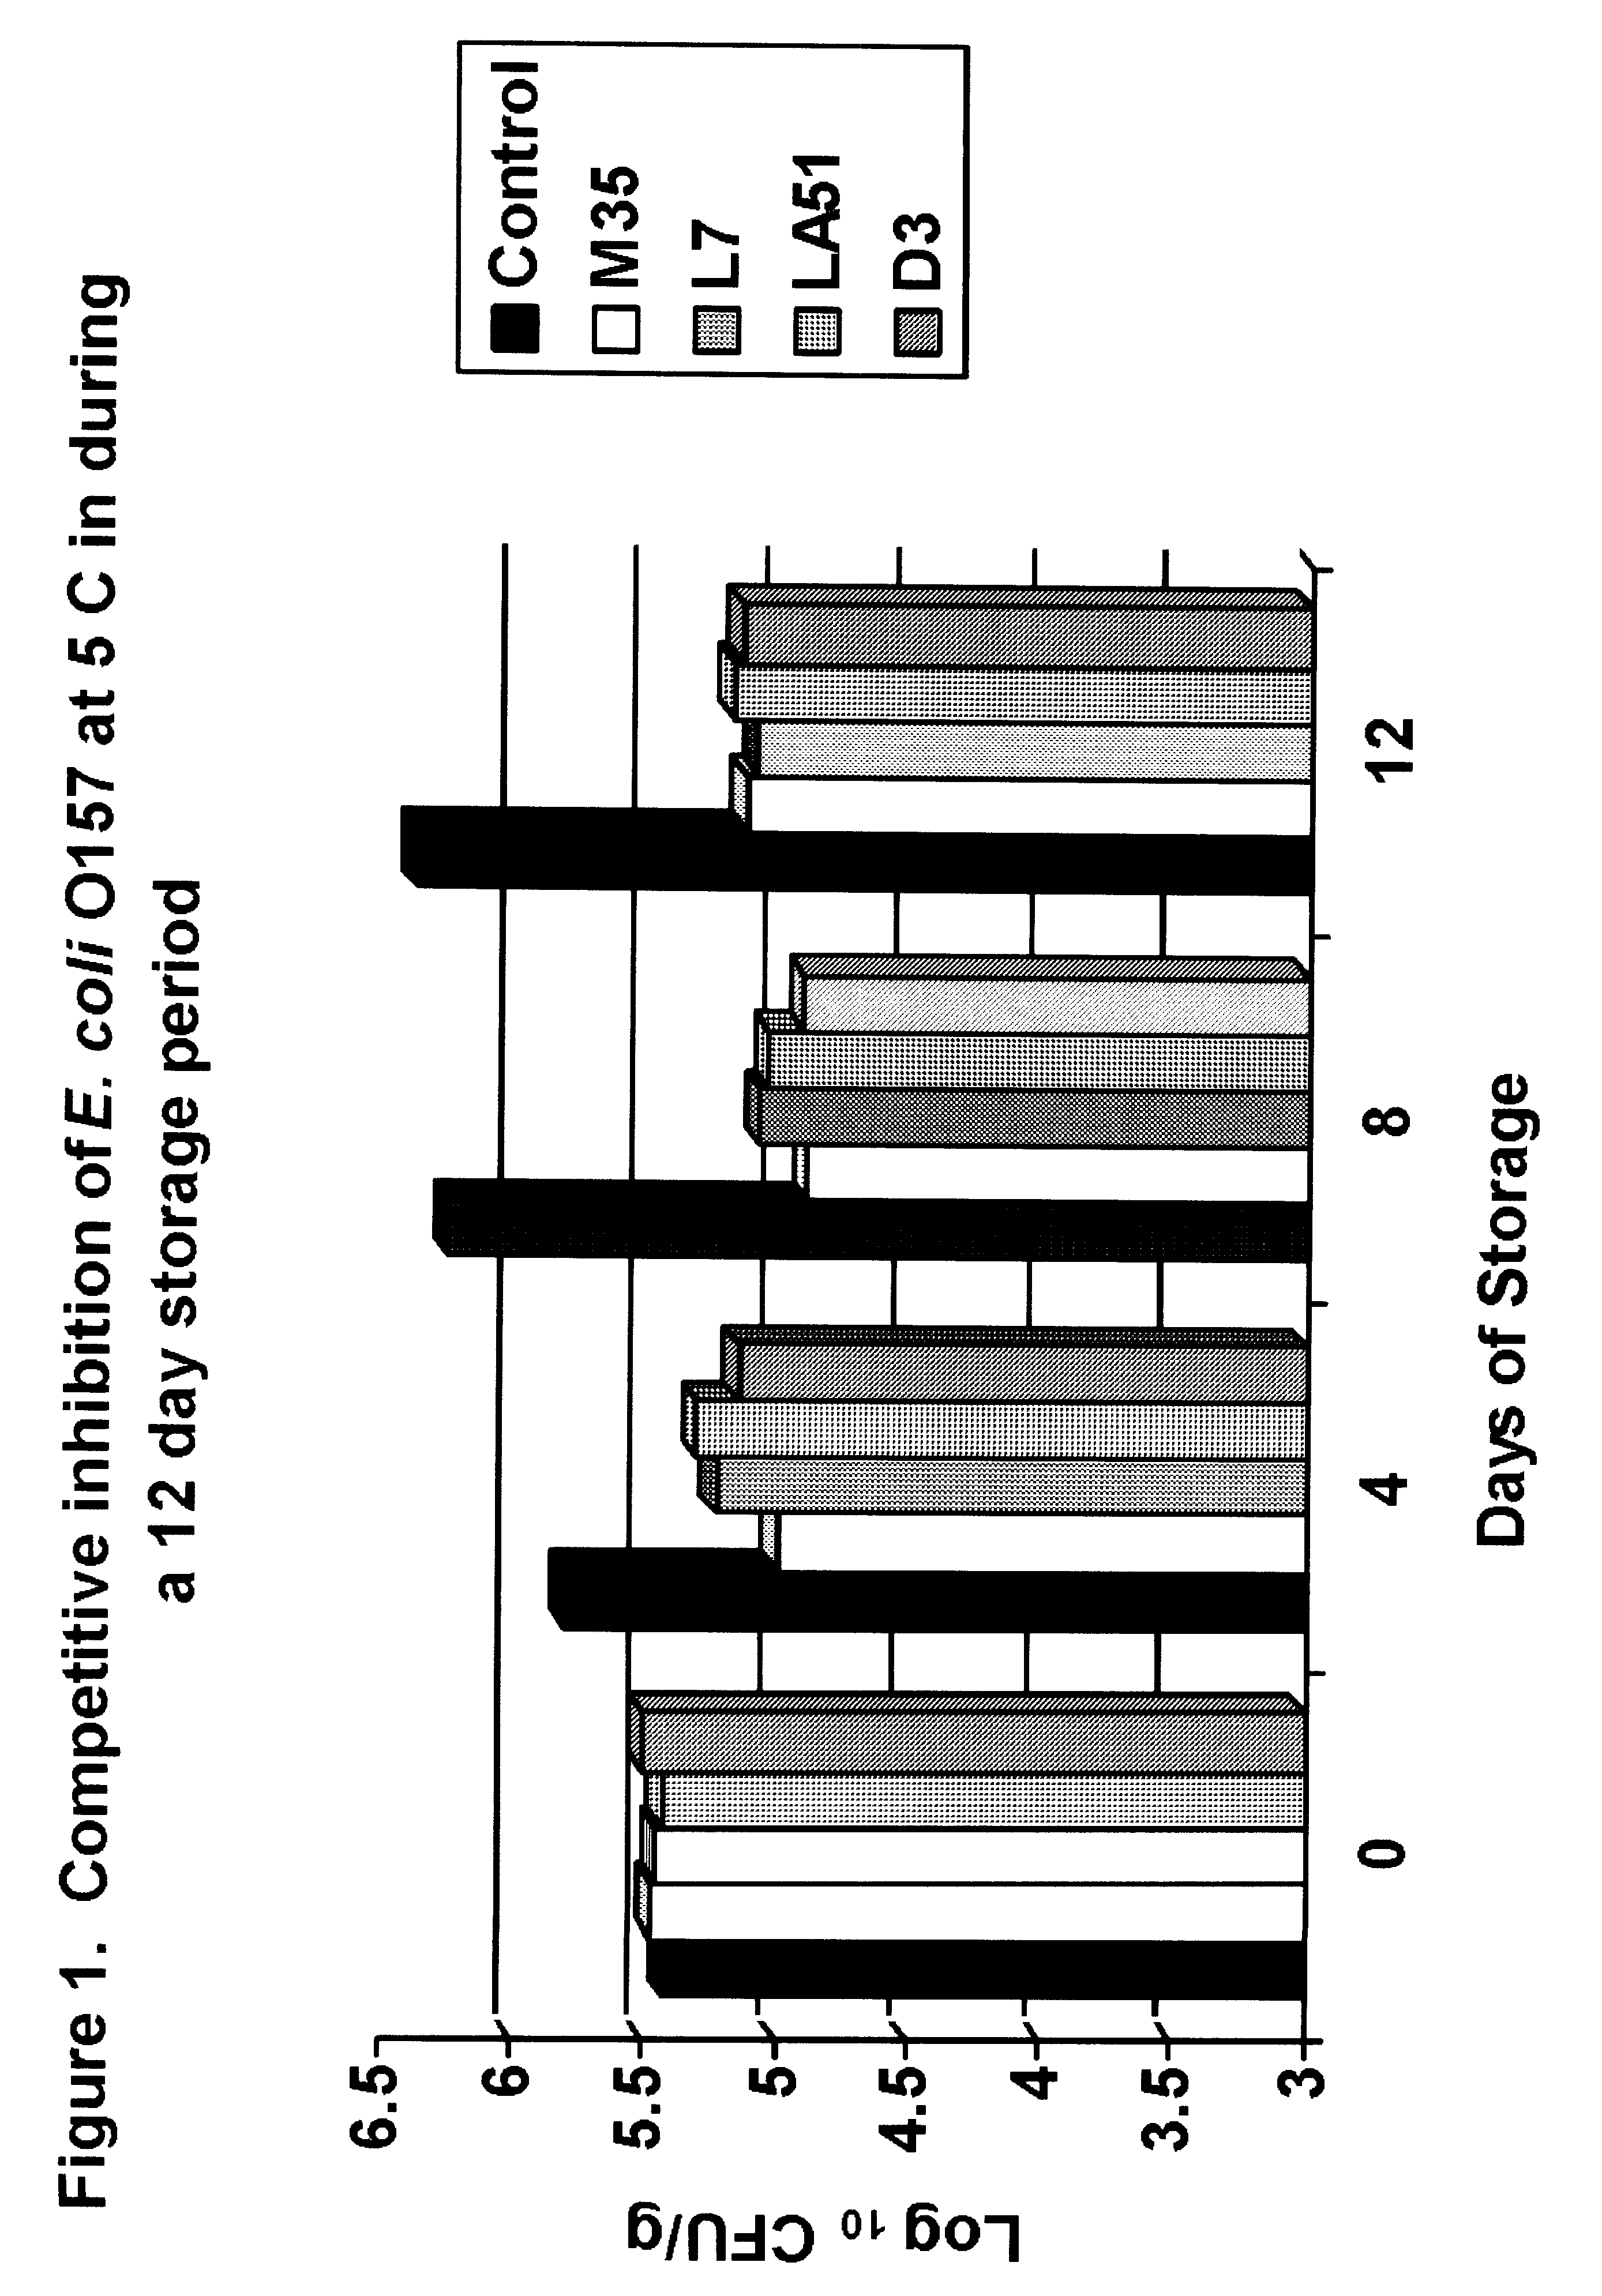 Compositions and methods for reducing the pathogen content of meat and meat products